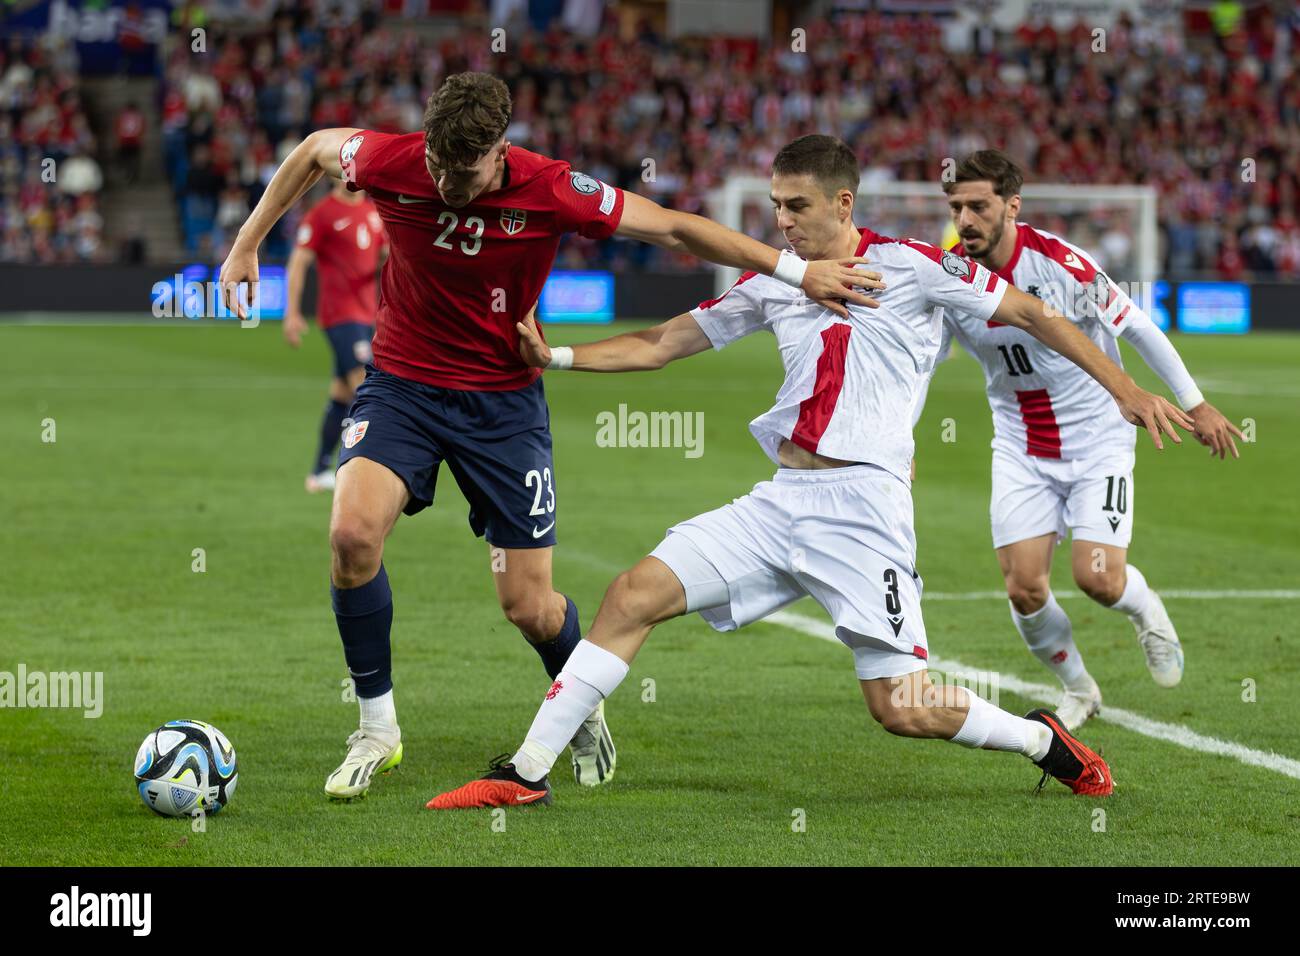 Oslo, Norway 12 September 2023 Luka Gagnidze of Georgia in pursuit of the ball against Jorgen Larsen of Norway during theUEFA European Championship 2024 qualifiers Group A match between Norway and Georgia held at the Ullevaal Stadion in Oslo, Norway credit: Nigel Waldron/Alamy Live News Stock Photo